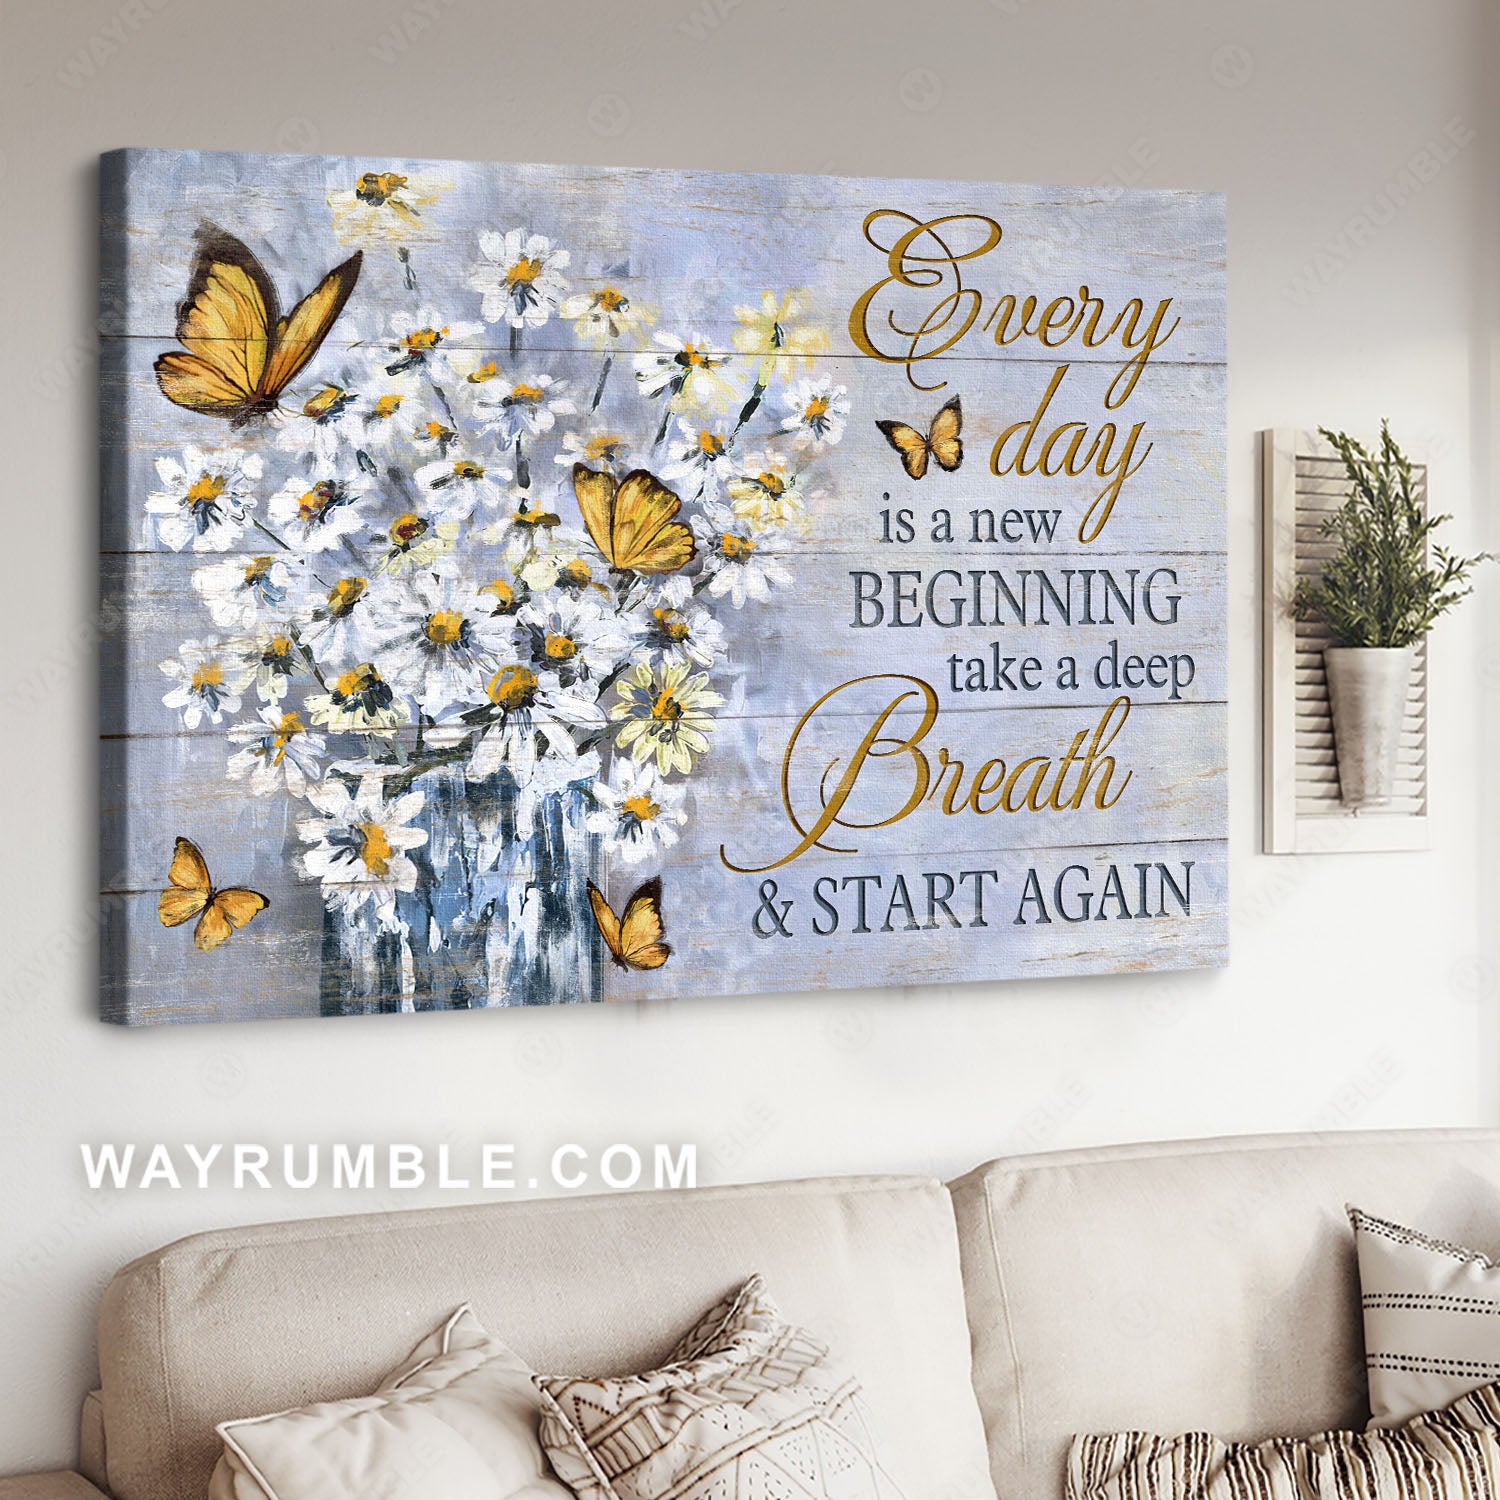 Abstract art, White daisy painting, Yellow butterfly, Every day is a new beginning - Jesus Landscape Canvas Prints, Home Decor Wall Art